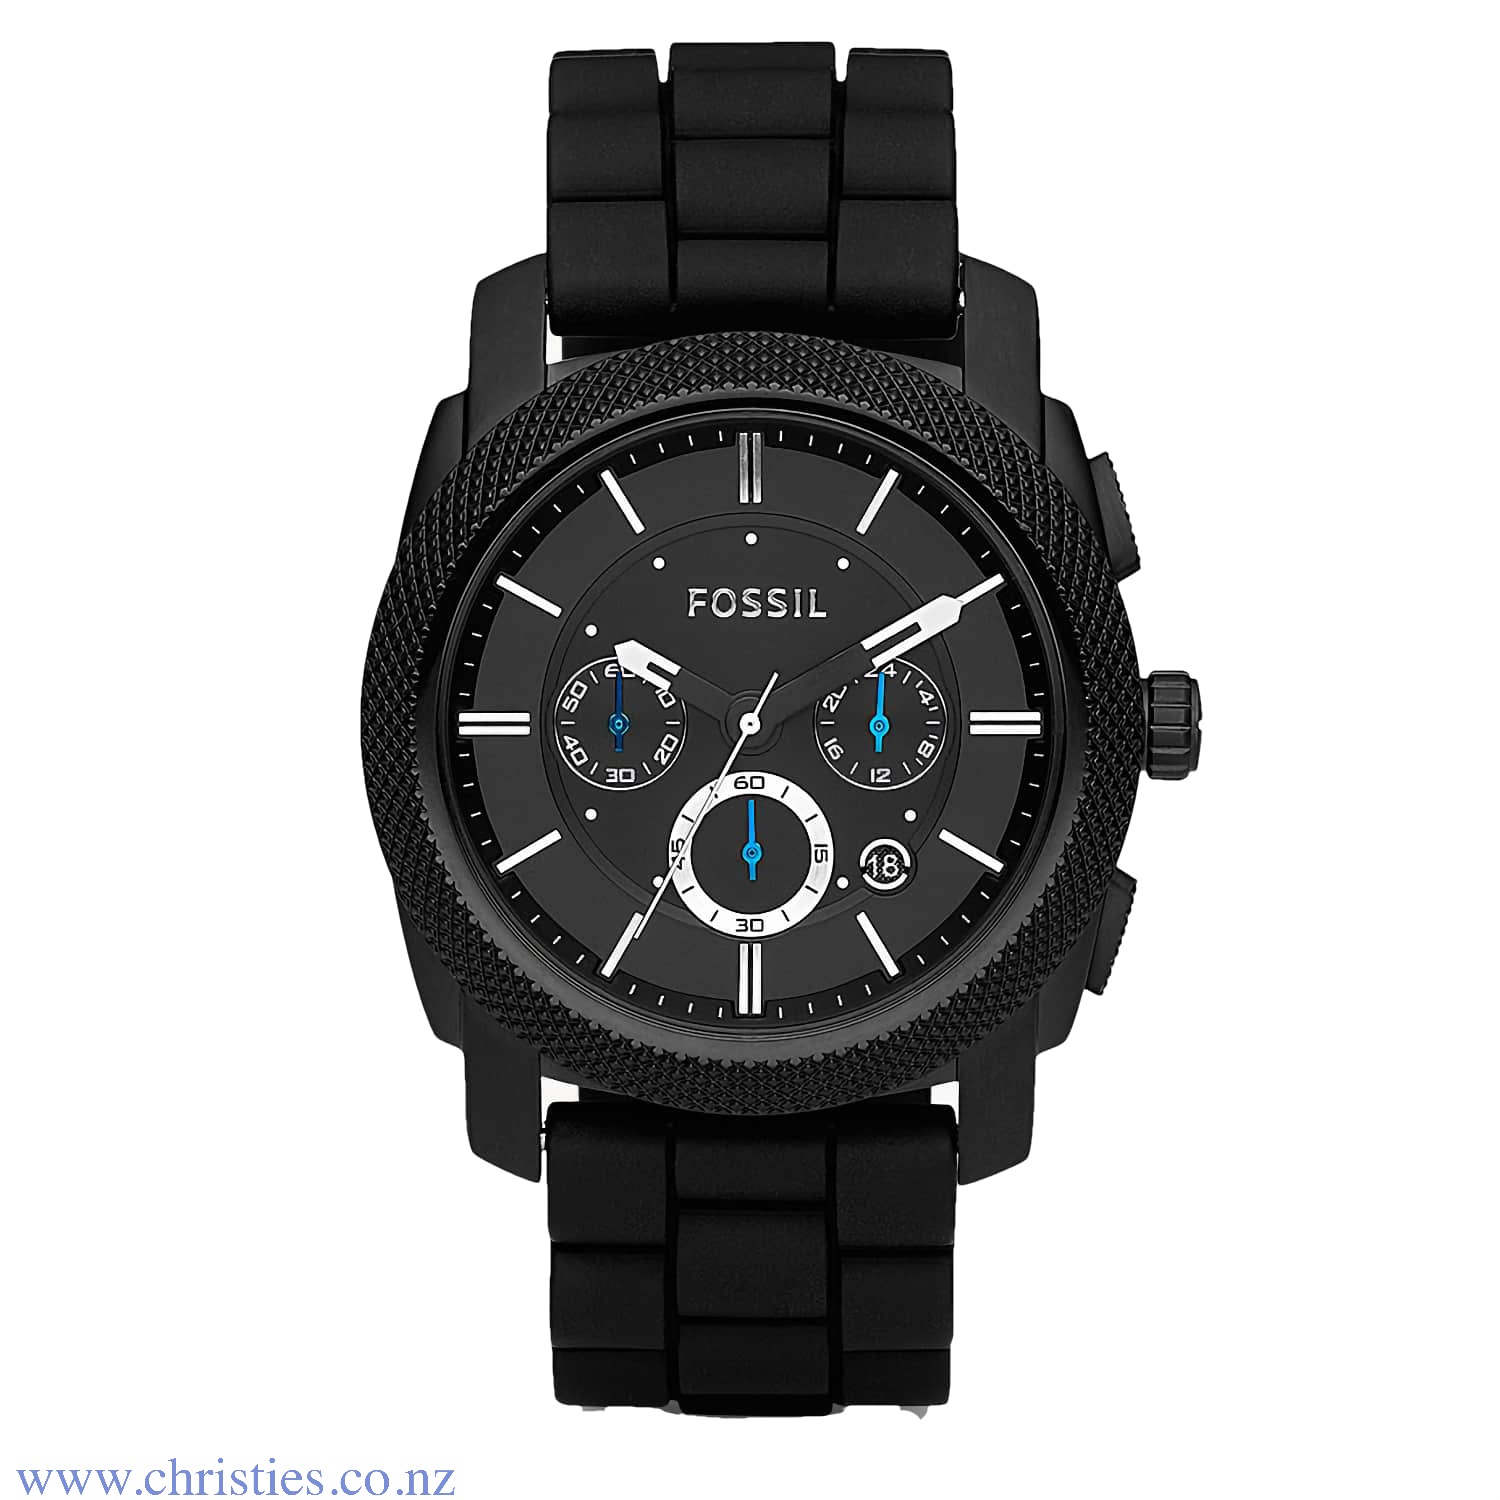 FS4487 Fossil Machine Chronograph Black Silicone Watch. FS4487 Fossil Machine Chronograph Black Silicone Watch 50 Metres Water Reistant Humm -Buy Little things up to $1000 and choose 10 weekly or 5 fortnightly payments with no interest. Late payment fee o